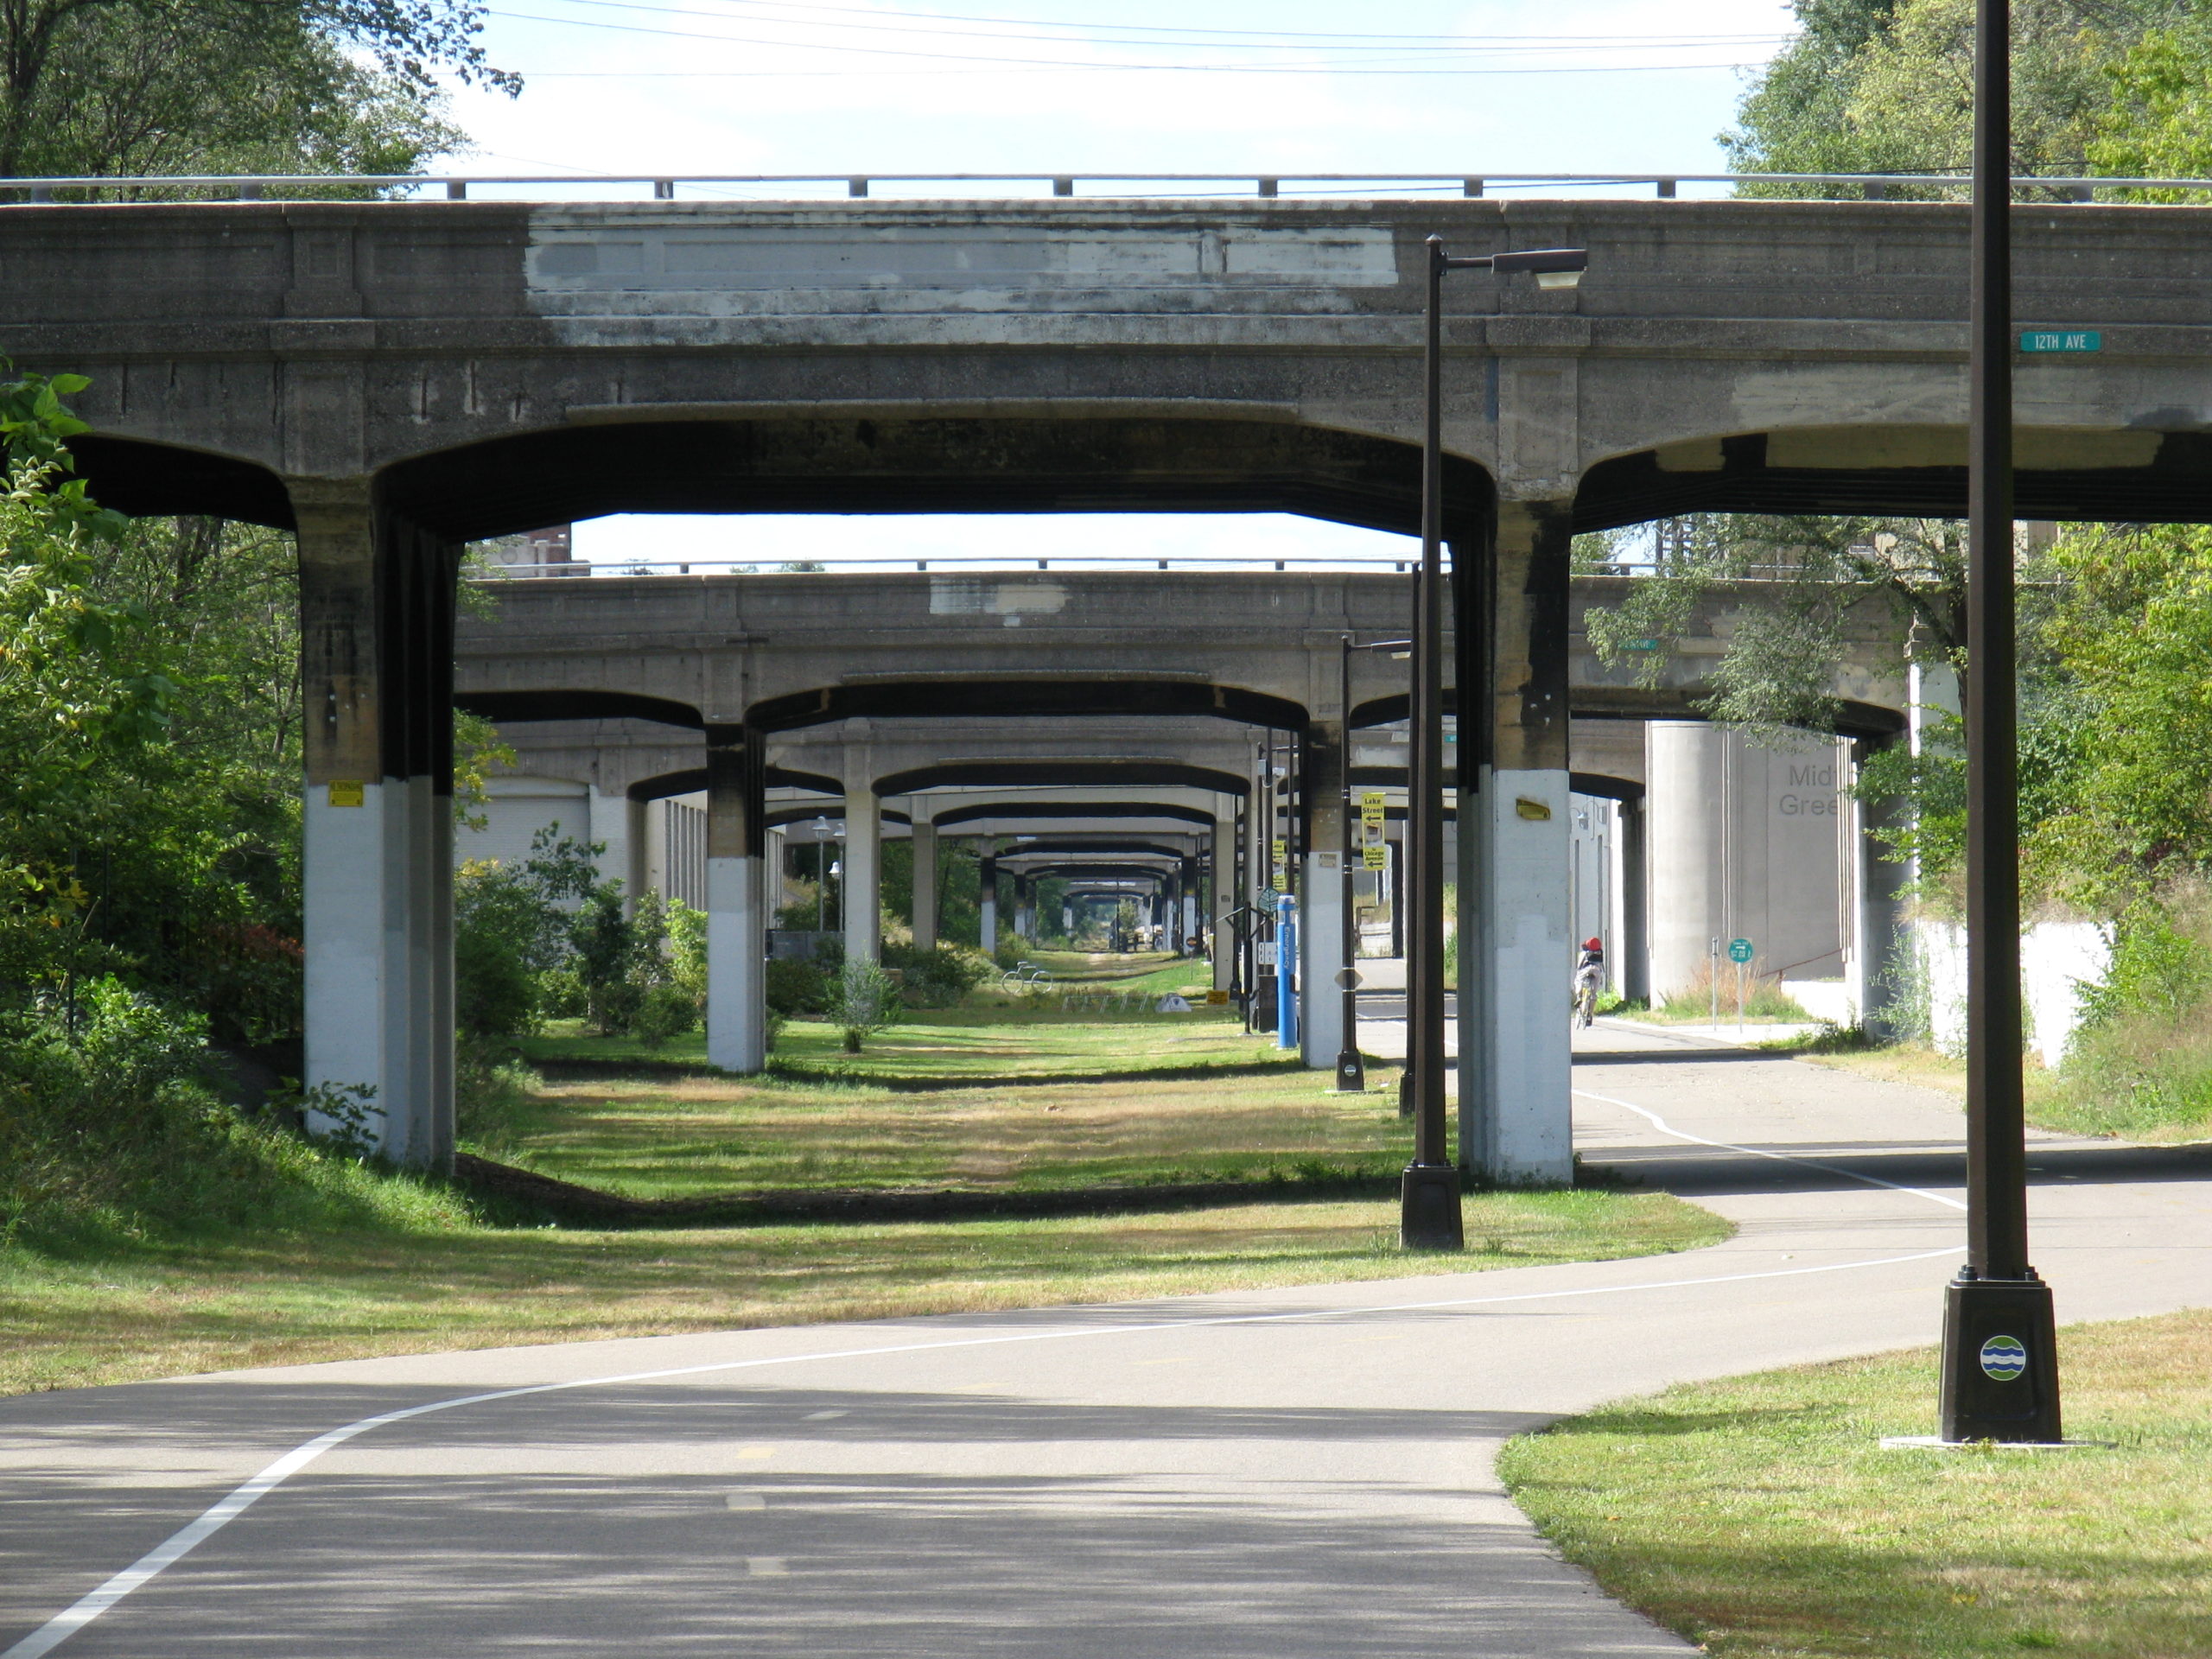 the Midtown Greenway makes the seawall say mercy